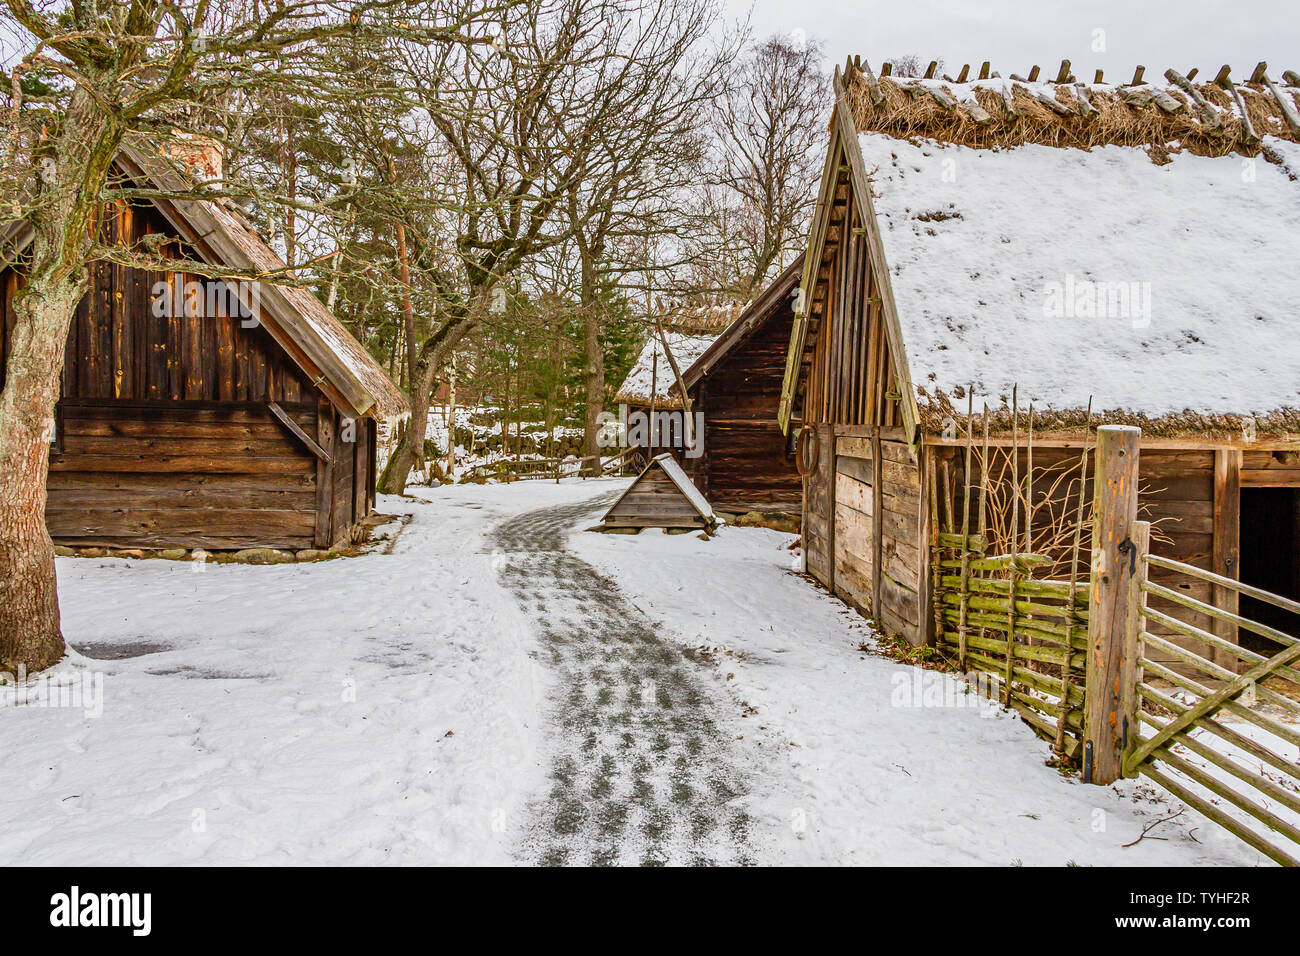 Traditional Swedish farm buildings in Skansen open-air museum, Stockholm, Sweden. January 2019. Stock Photo